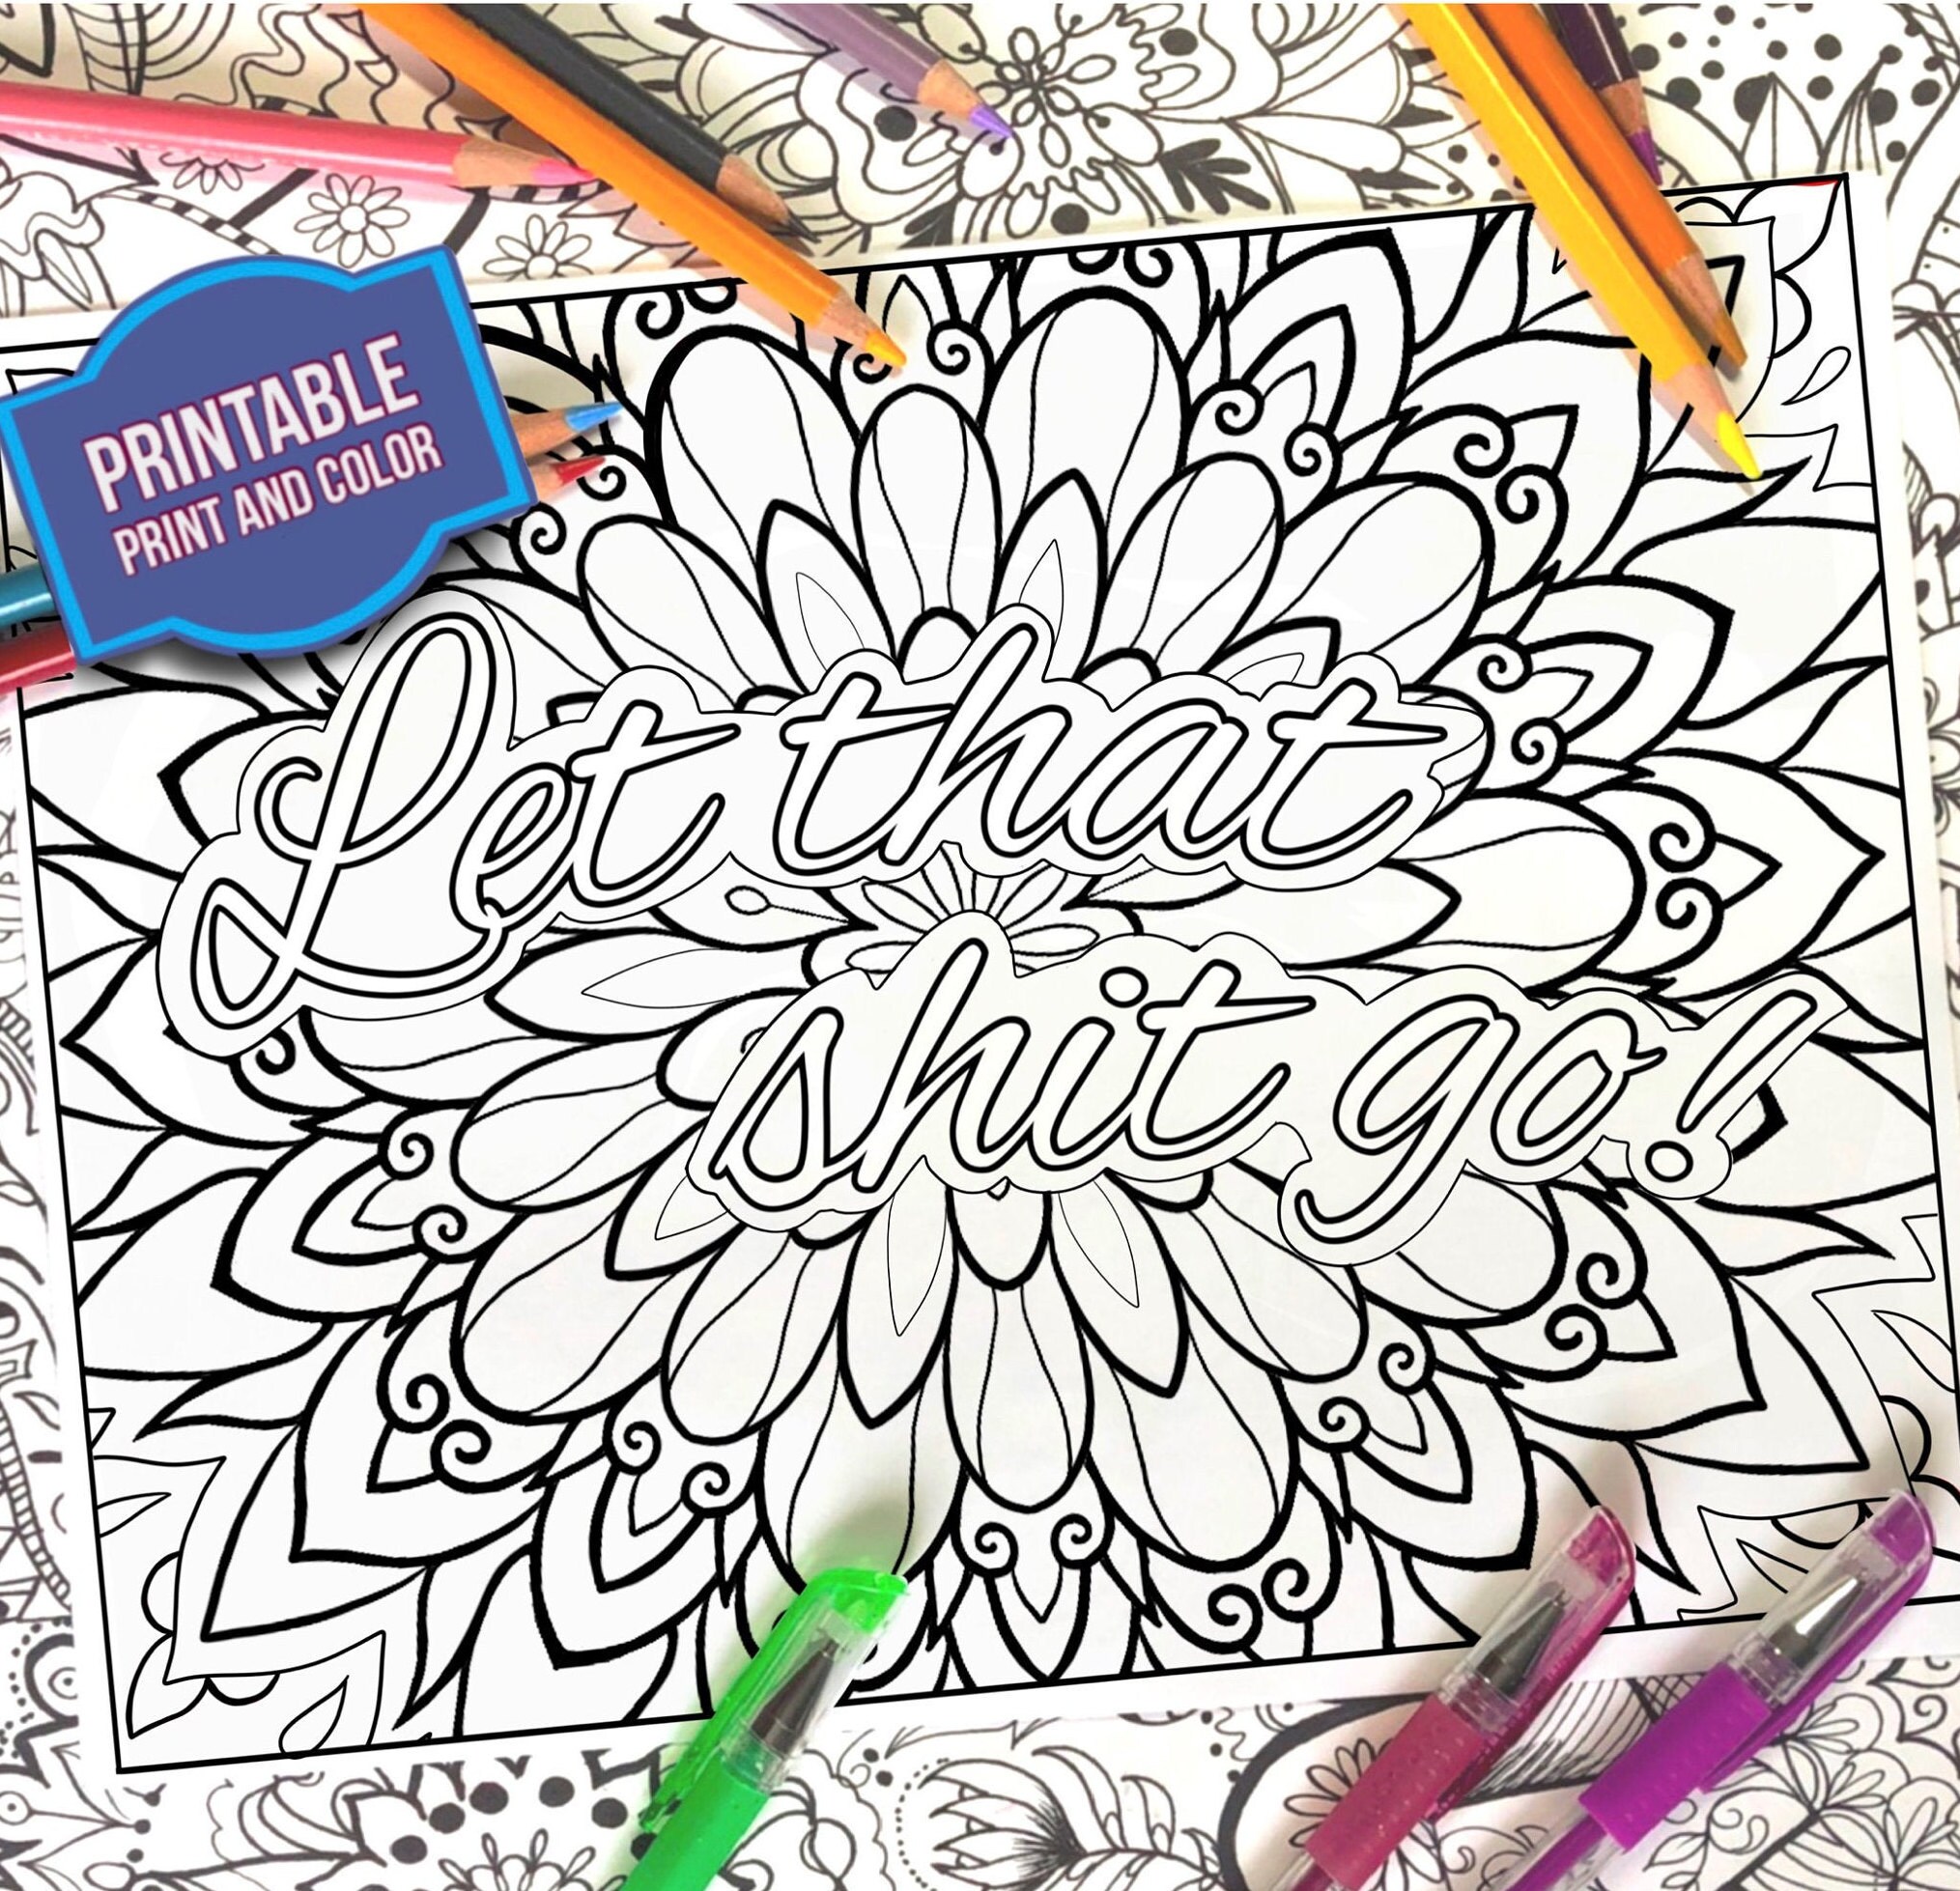 Coloring page let that shit go sassy coloring page print and color adult coloring sheet instant download mandala coloring instant download